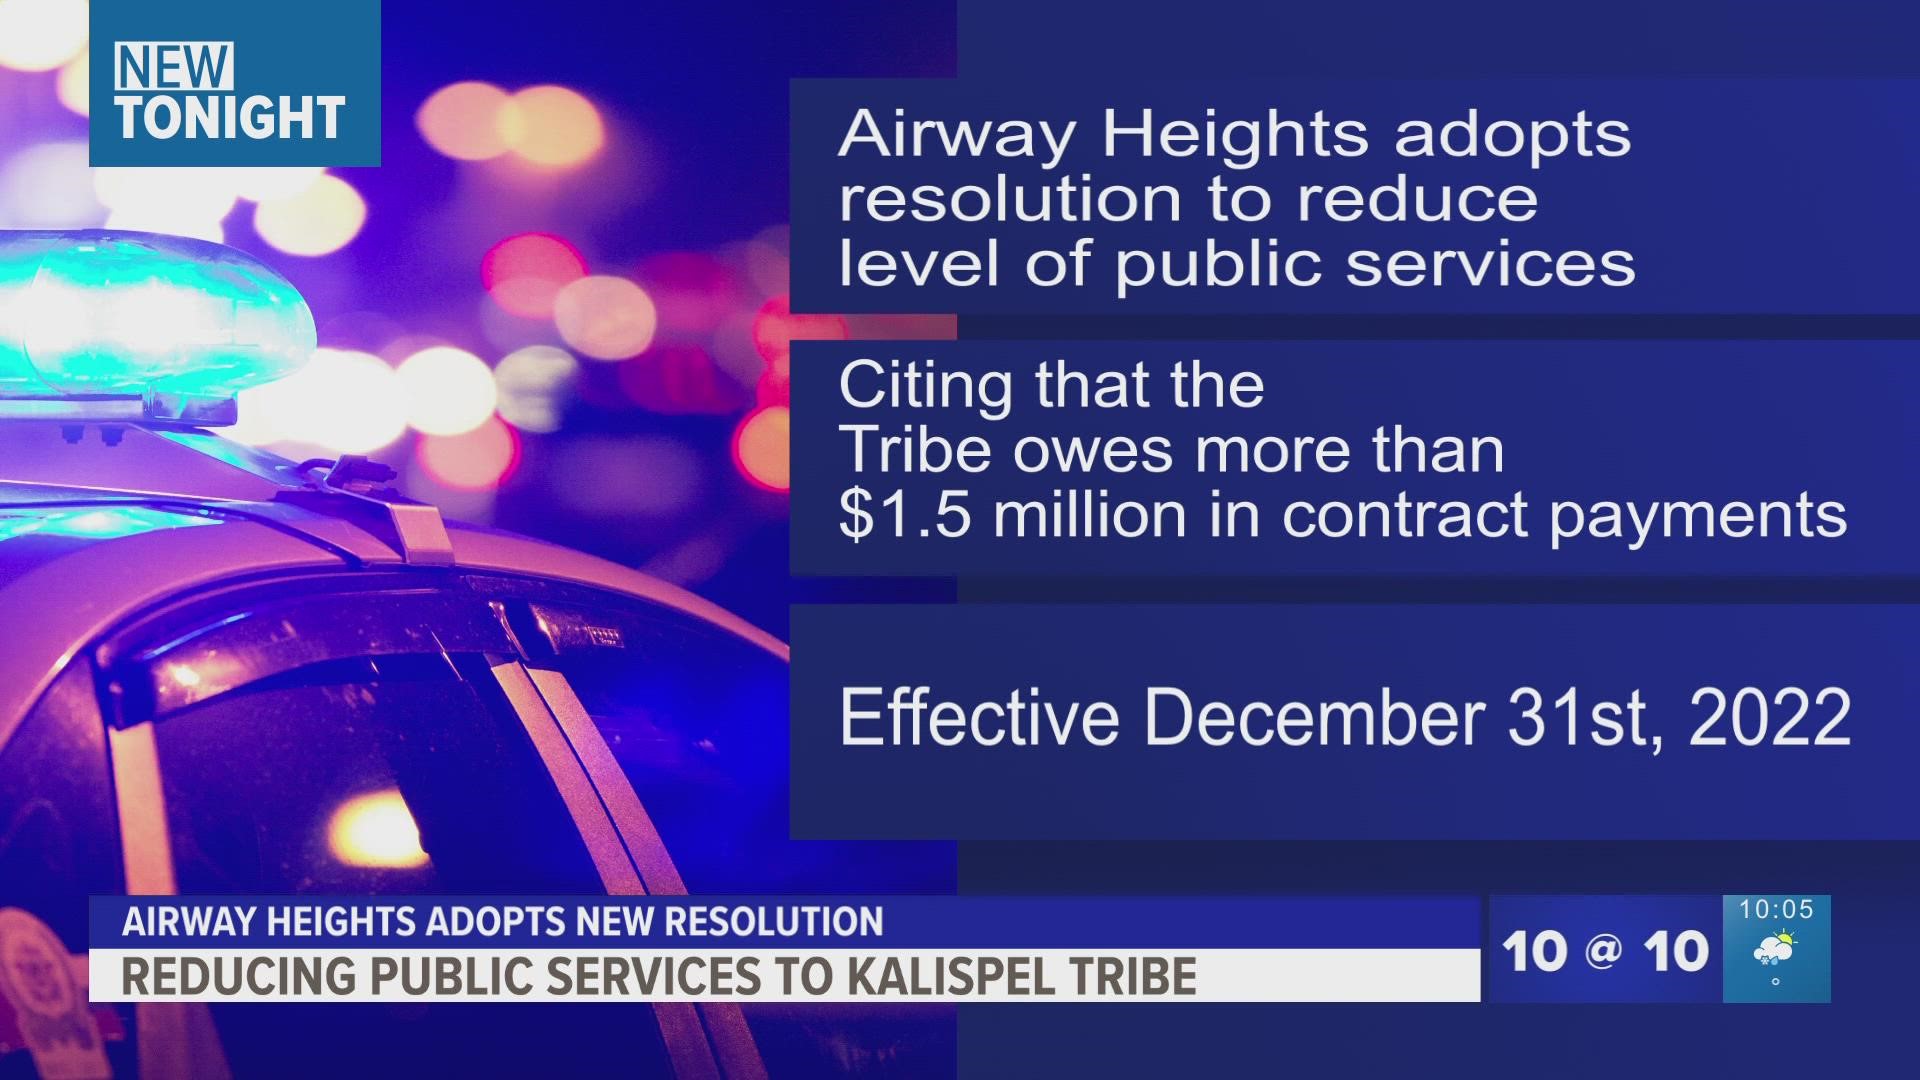 Airway Heights City Council says the tribe owes more than $1.5 million in contract payments.